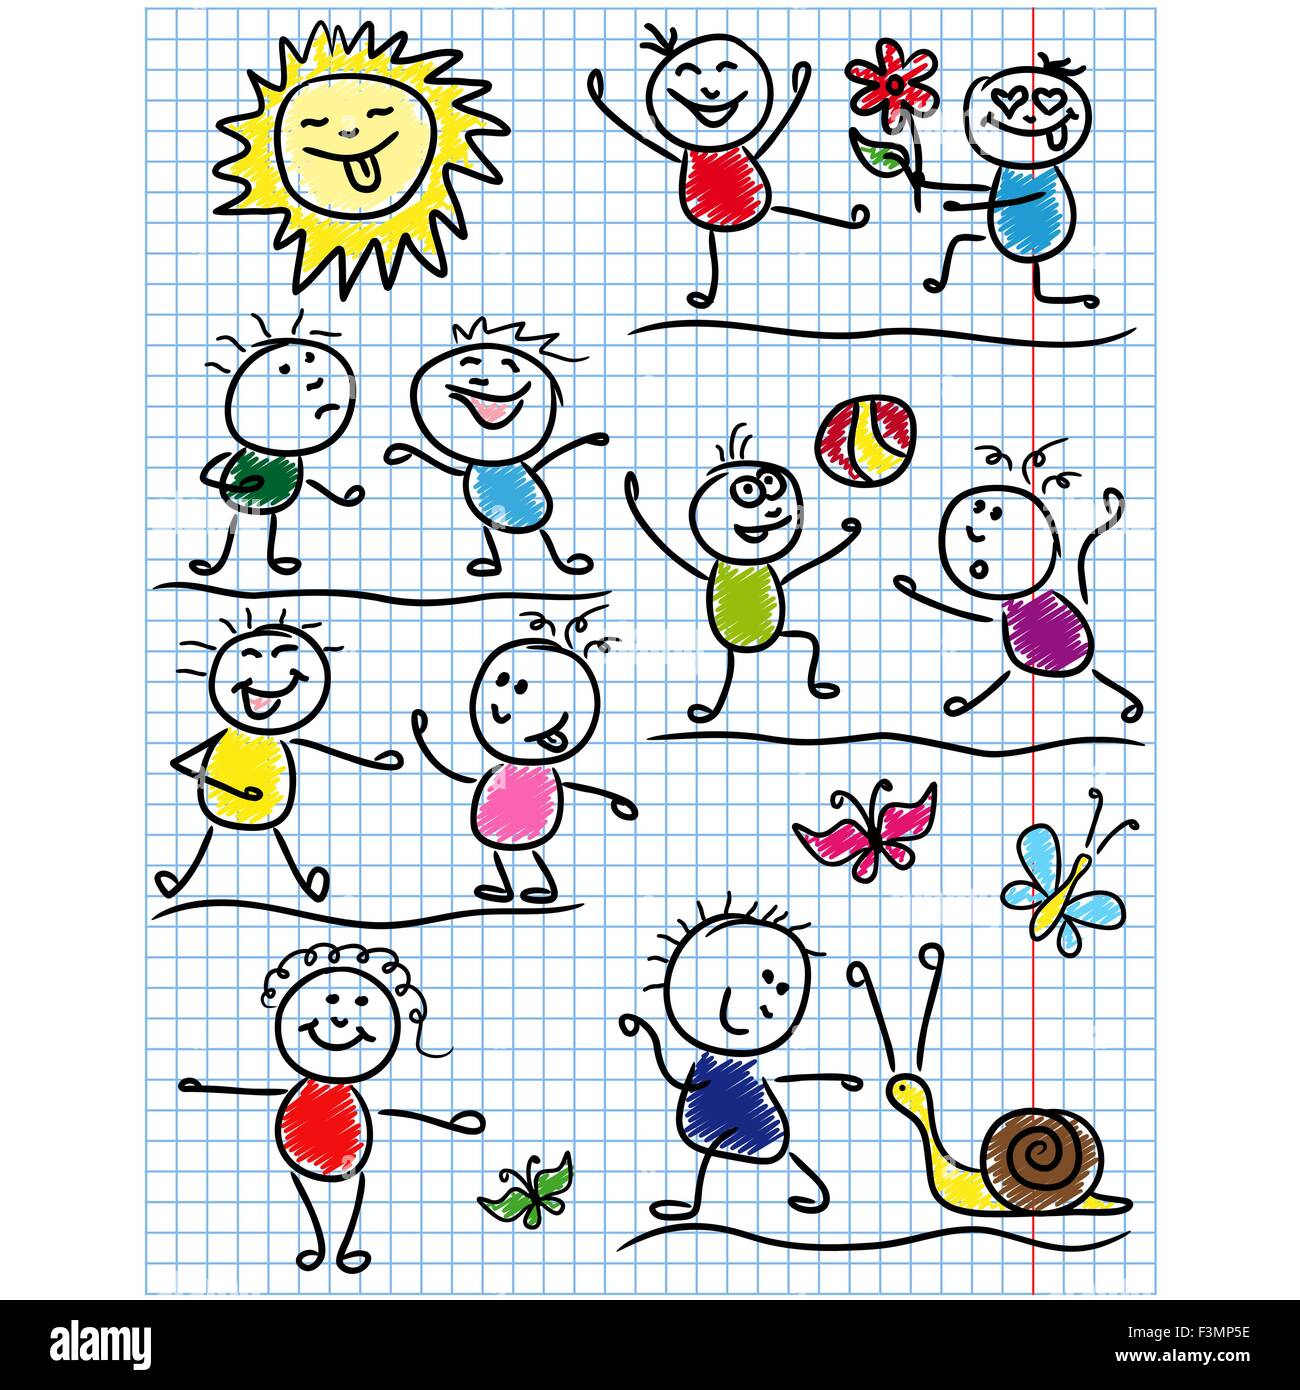 Amusing scenes with smiling sun and set of several kid figures, sketching colored cartoon vector artwork as a childish drawing o Stock Vector